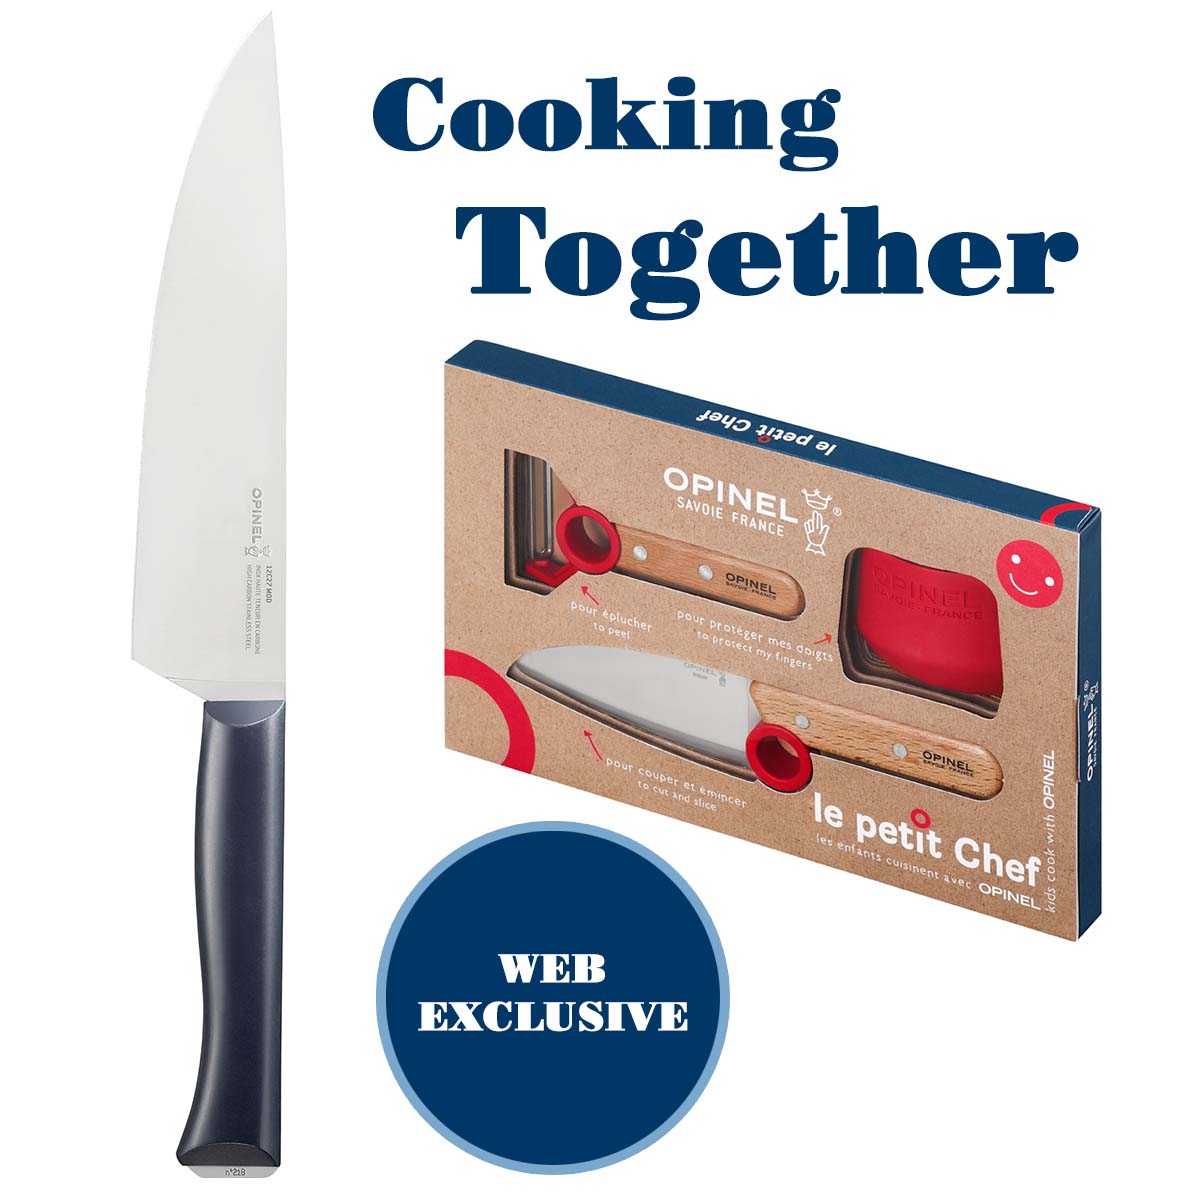 KITCHEN KNIFE SET Chef's Knife Cook Utility Knives Stainless Steel